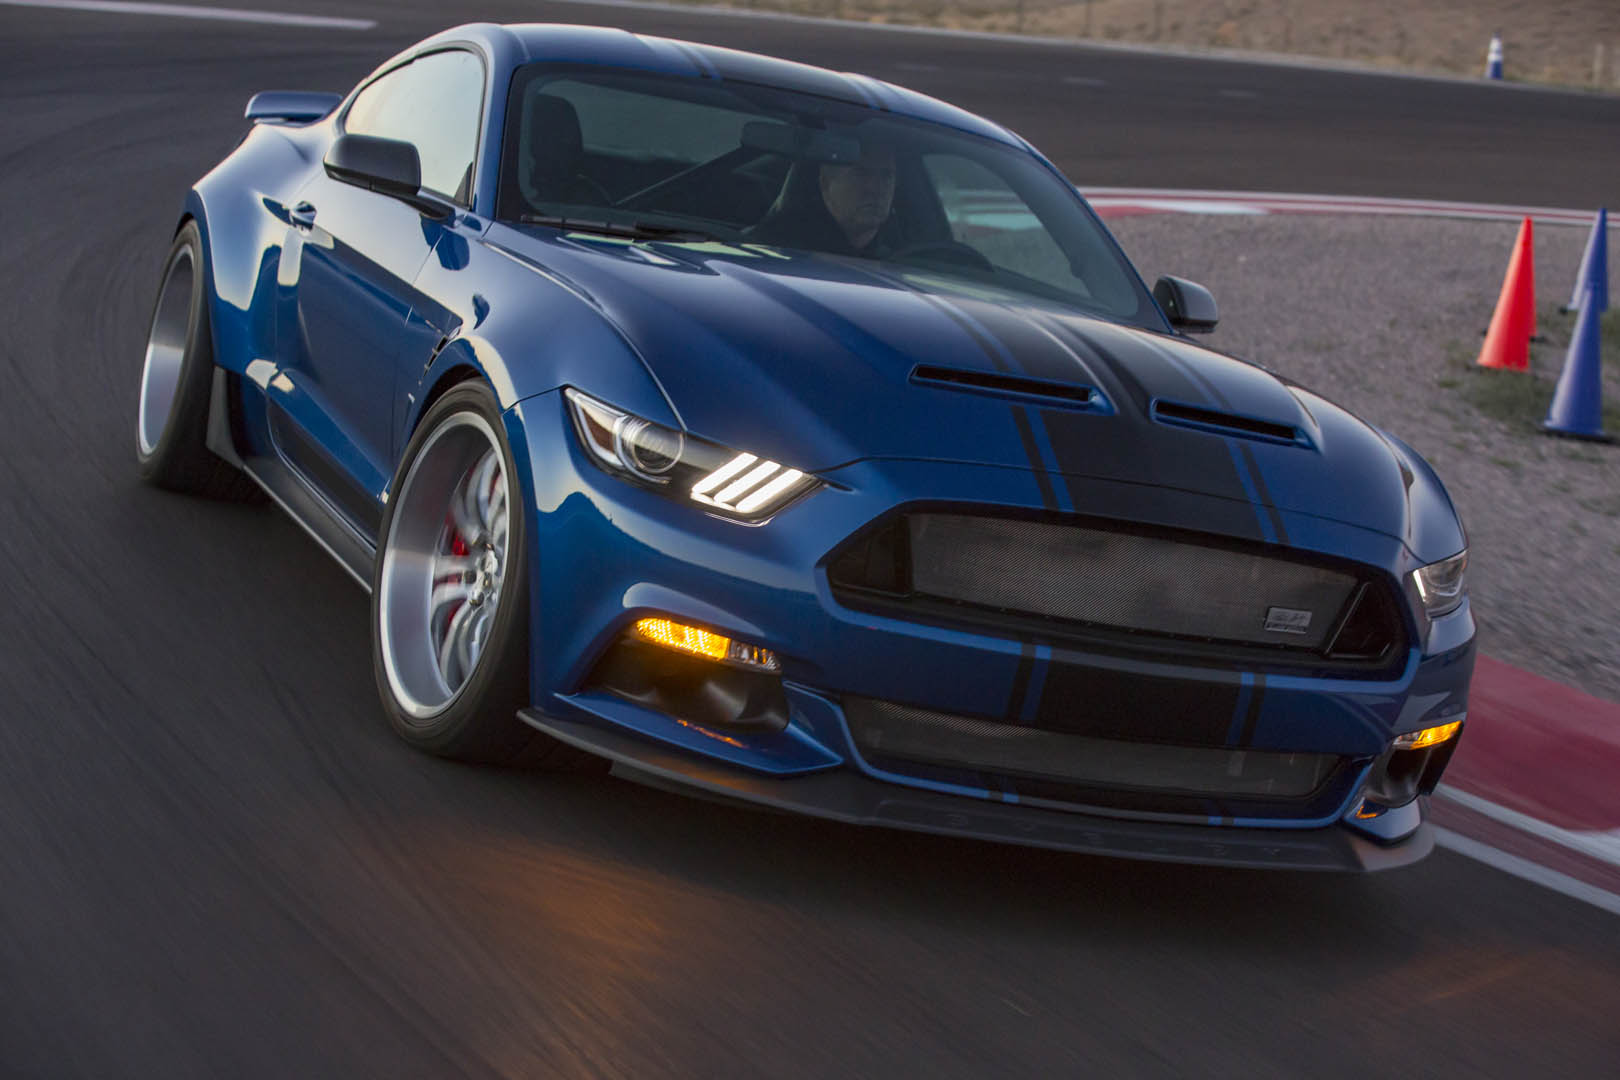 Shelby Mustang Super Snake wide body concept